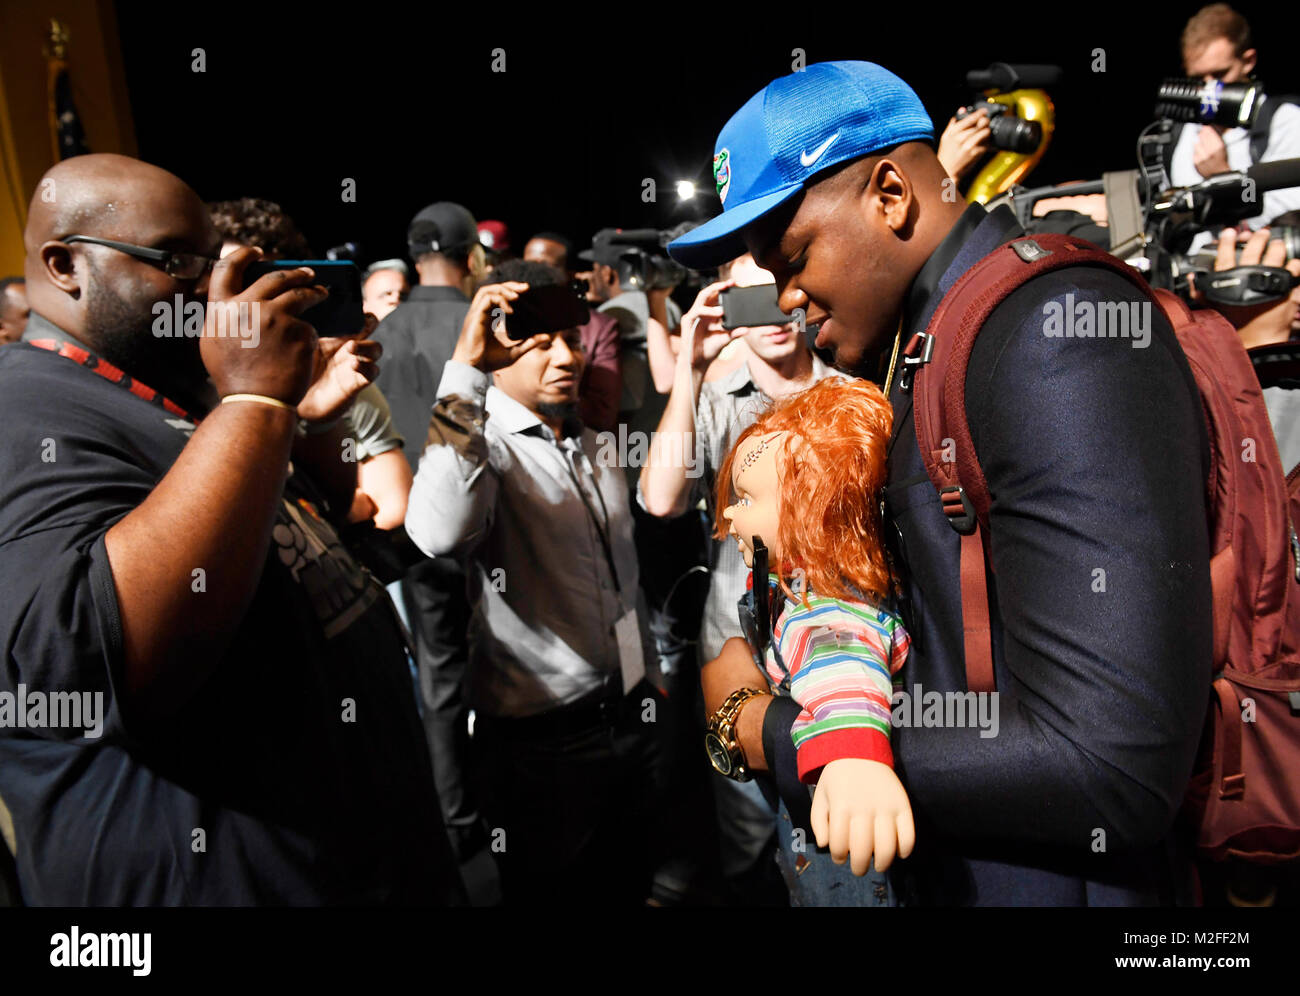 Plantation, Florida, USA. 18th Jan, 2018. fl-sp-ah-nsd-20180207-12 Andrew Chatfield holds his Chucky doll as heÃ¢â‚¬â„¢s surrounded by the press after signing to attend the University of Florida on National Signing Day at American Heritage in Plantation Wednesday morning. TAIMY ALVAREZ/SUN-SENTINEL Credit: Sun-Sentinel/ZUMA Wire/Alamy Live News Stock Photo